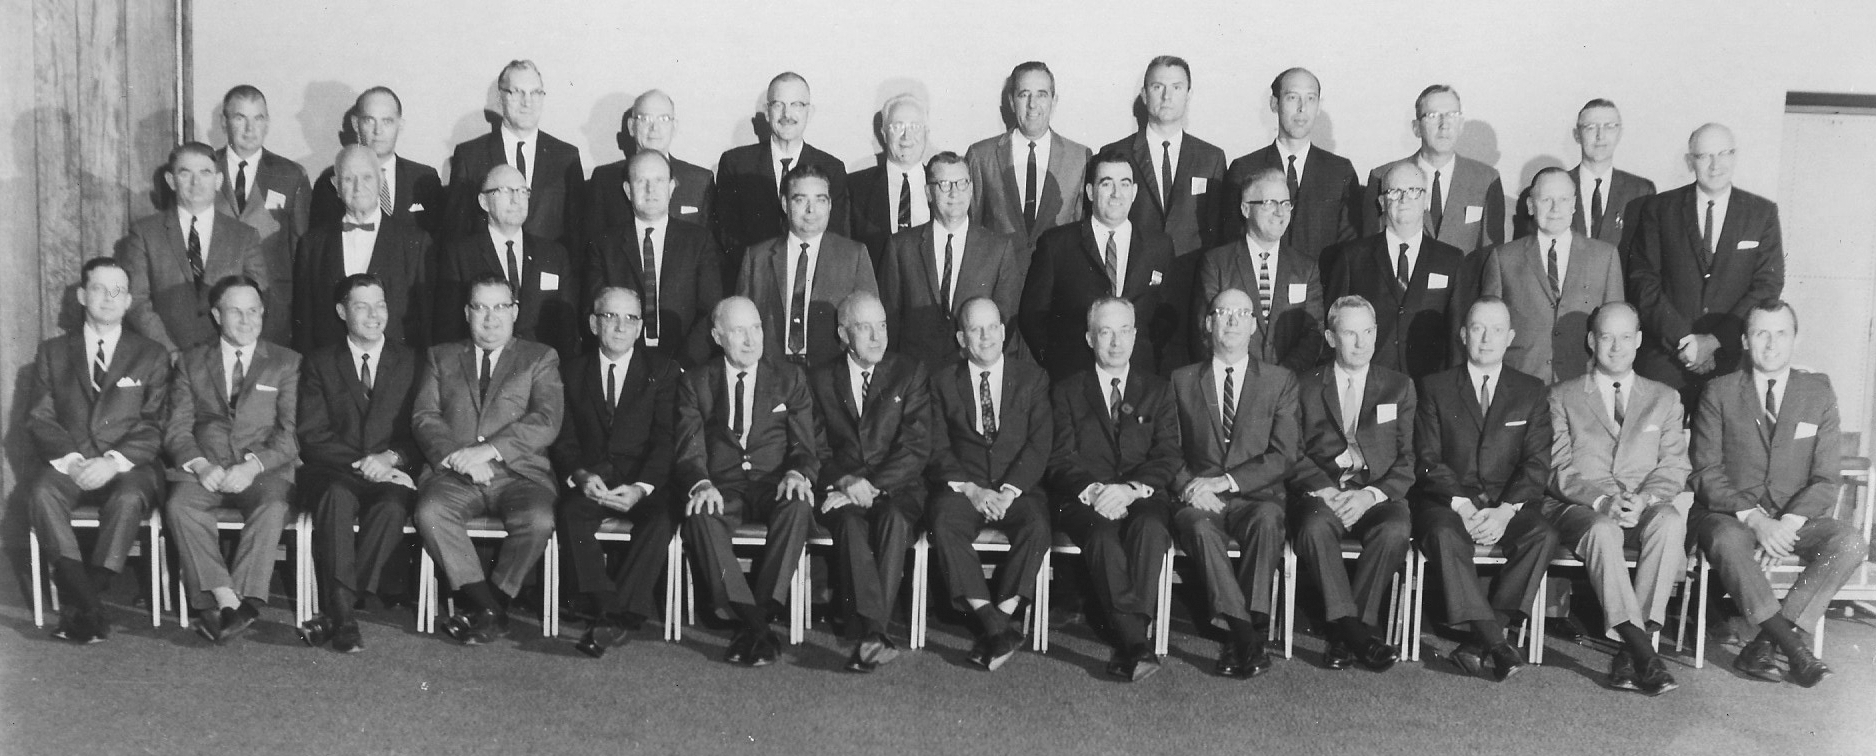 PPC 1966 In Montreal, Quebec